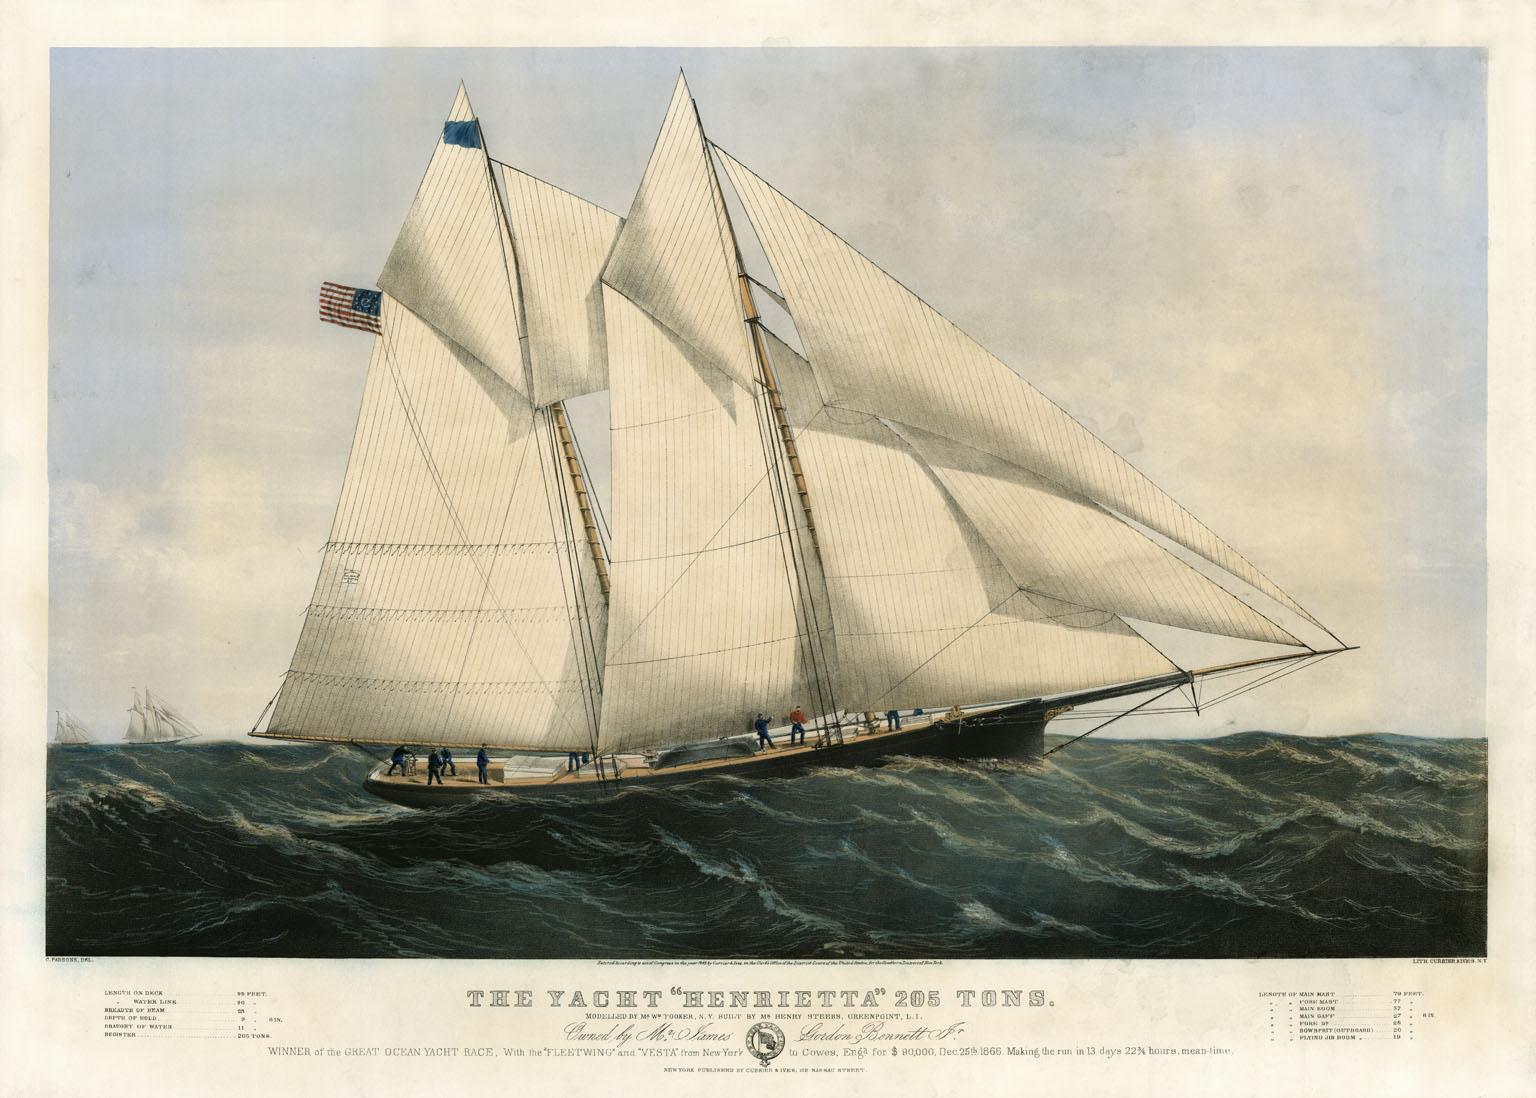 Charles Parsons Landscape Print - The Yacht "Henrietta" 205 Tons. Modelled by Mr. Wm. Tooker, N.Y. Built by Mr. ..